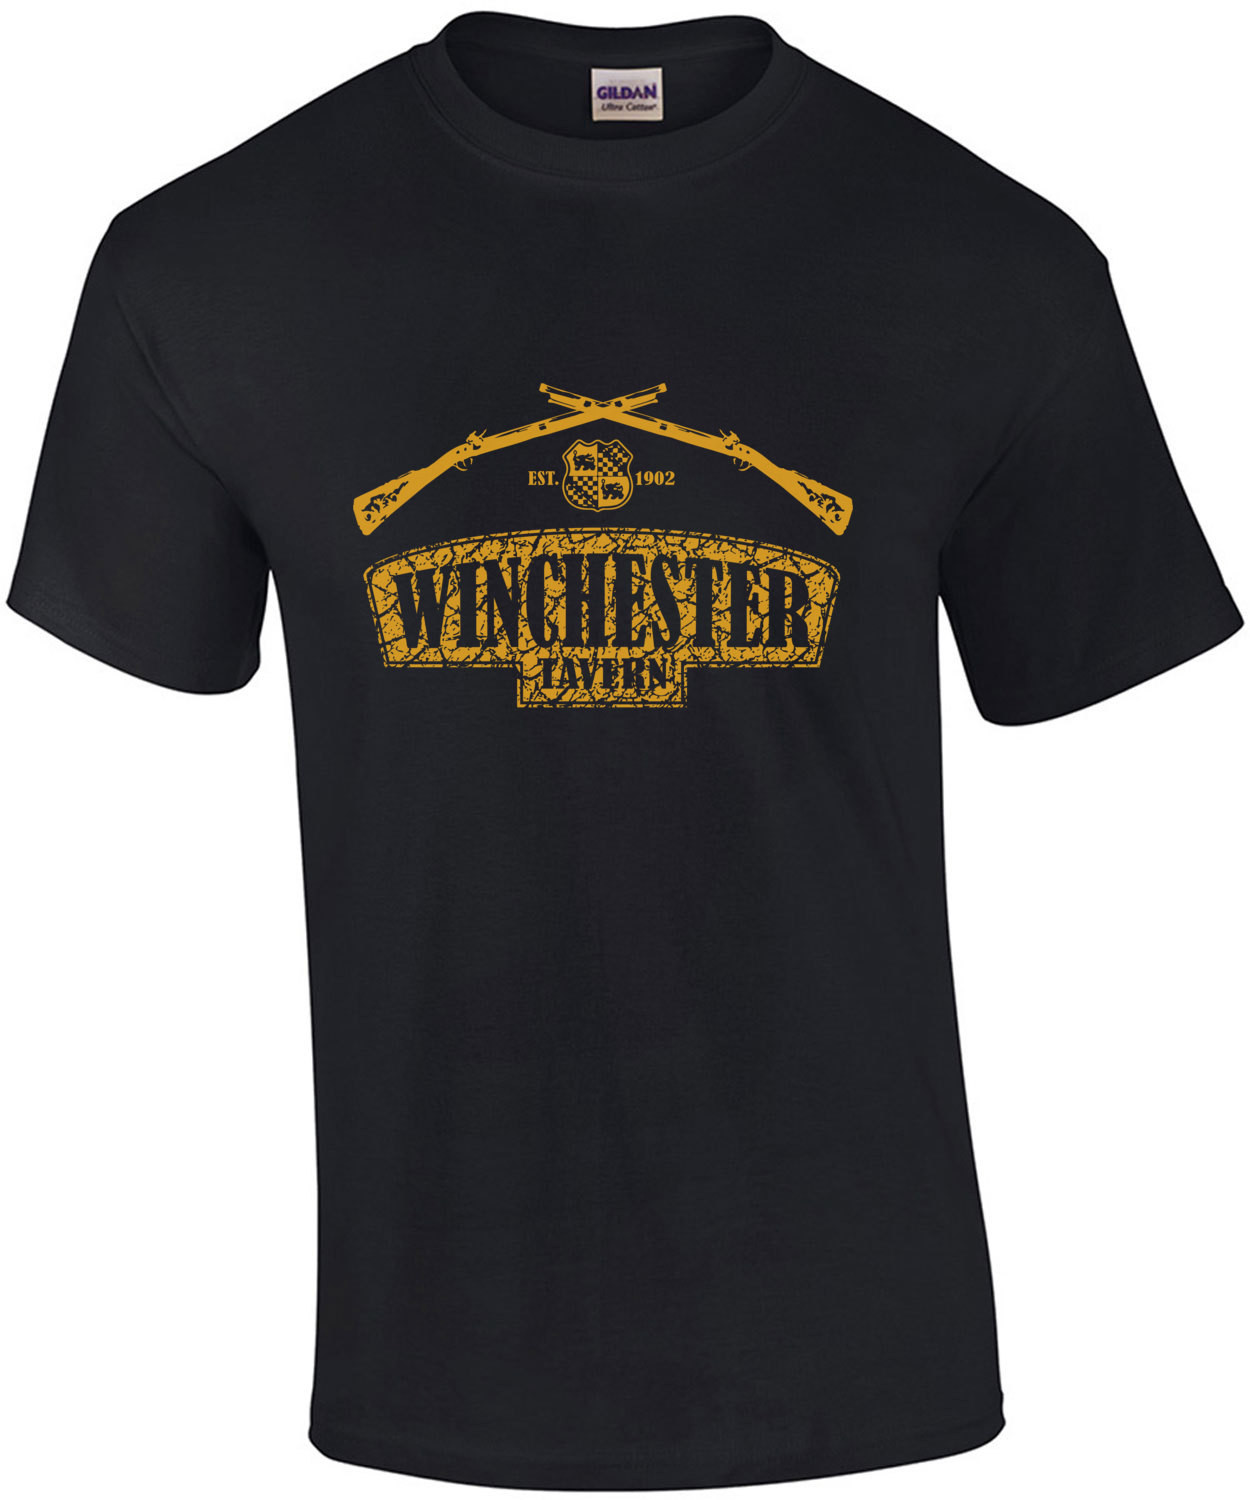 Winchester Tavern - Shaun of the Dead - 2000's T-Shirt